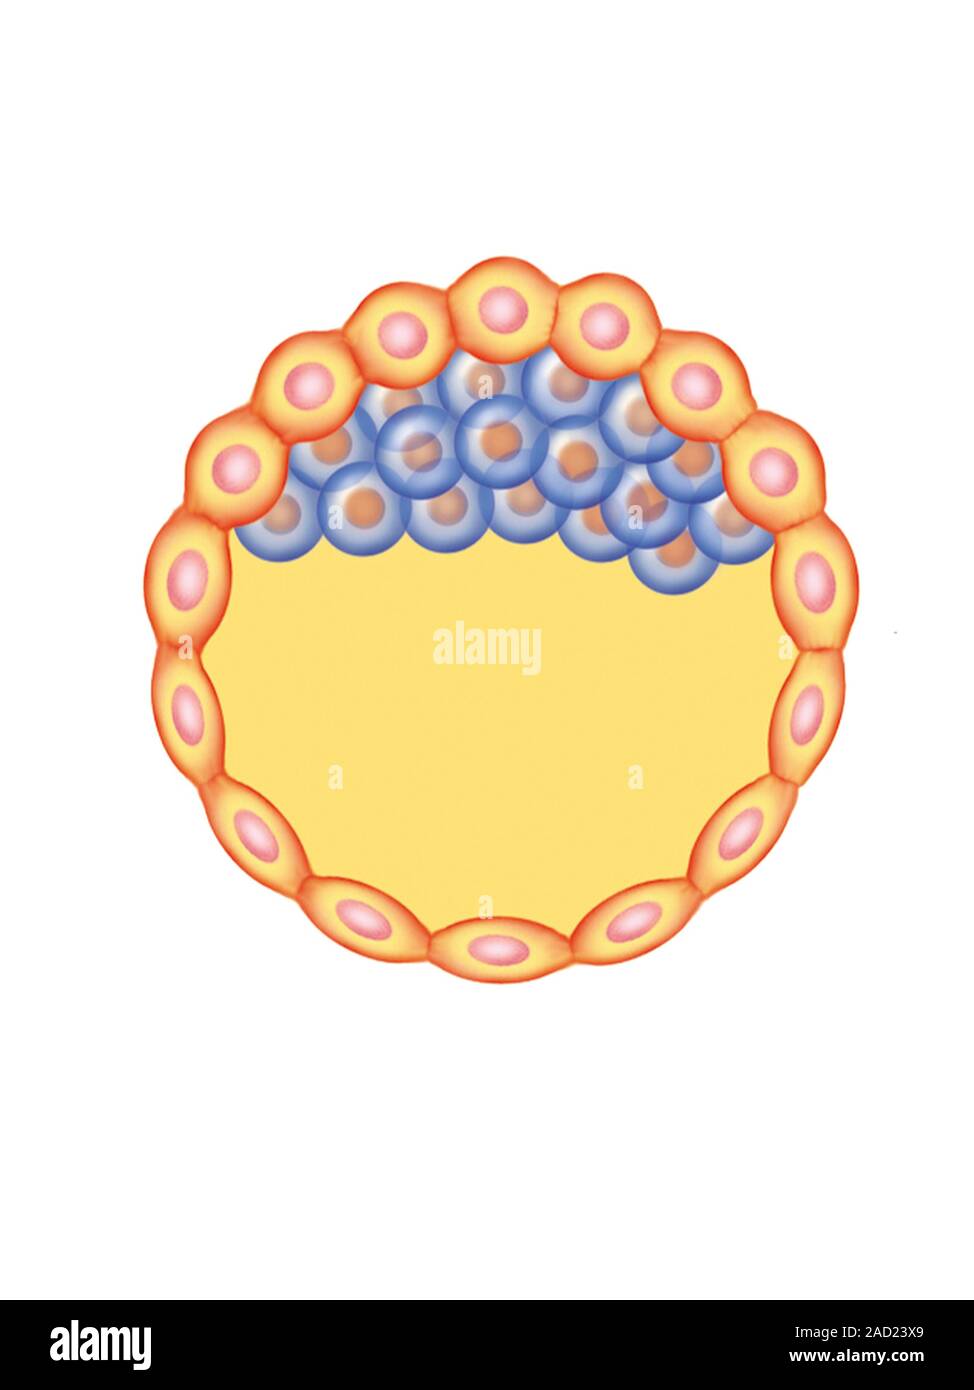 Illustration Of The Blastocyst Formation And Implantation This